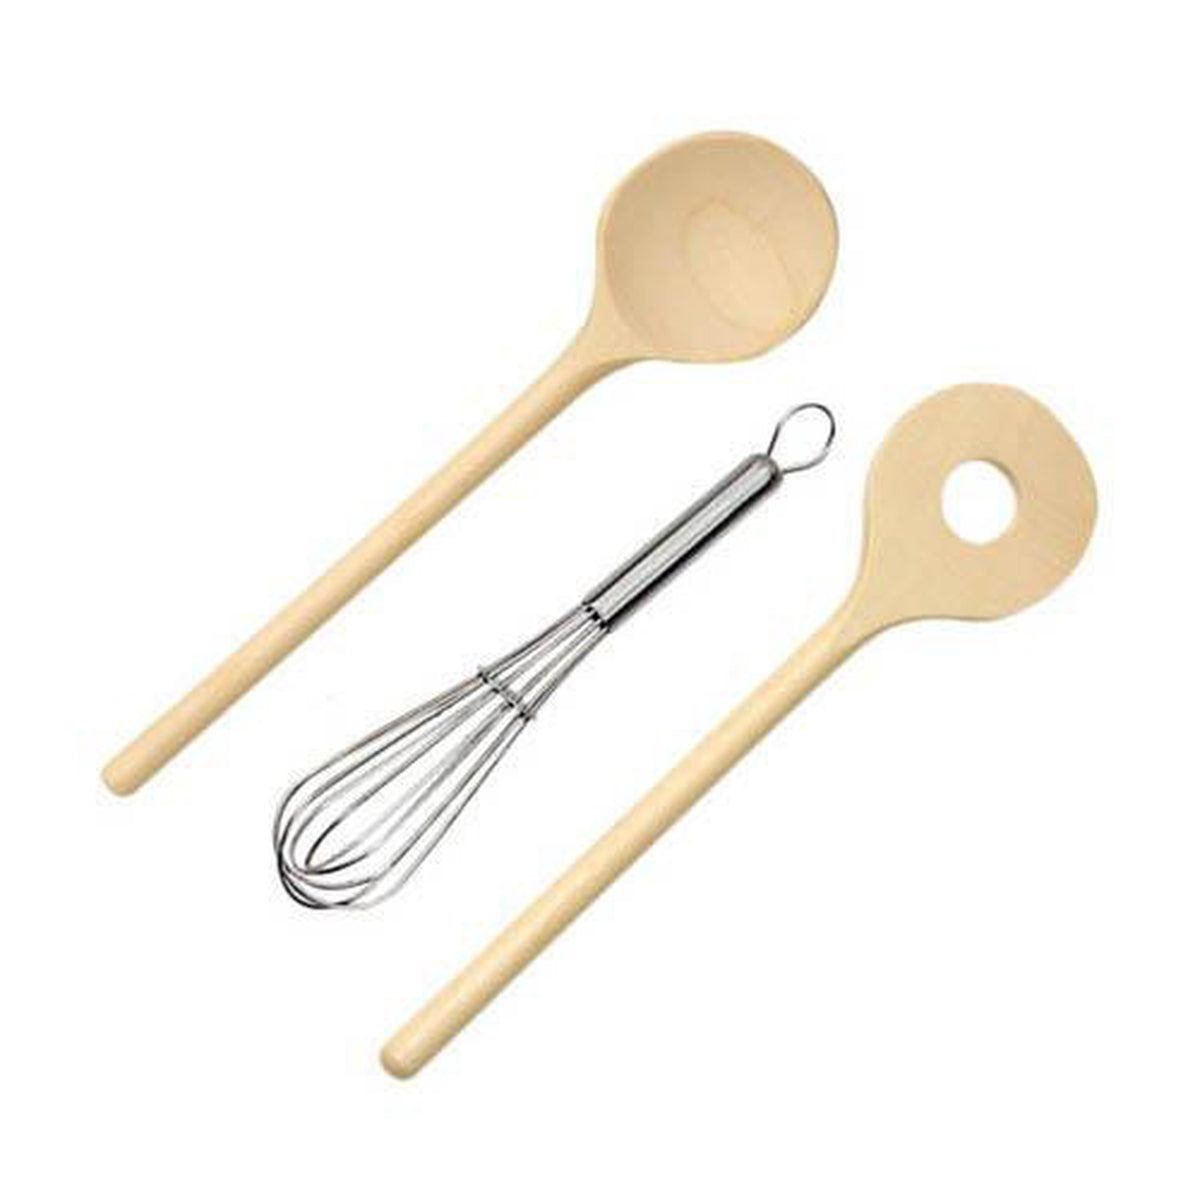 Gluckskafer wood and stainless steel whisk set-pretend play-Fire the Imagination-Dilly Dally Kids